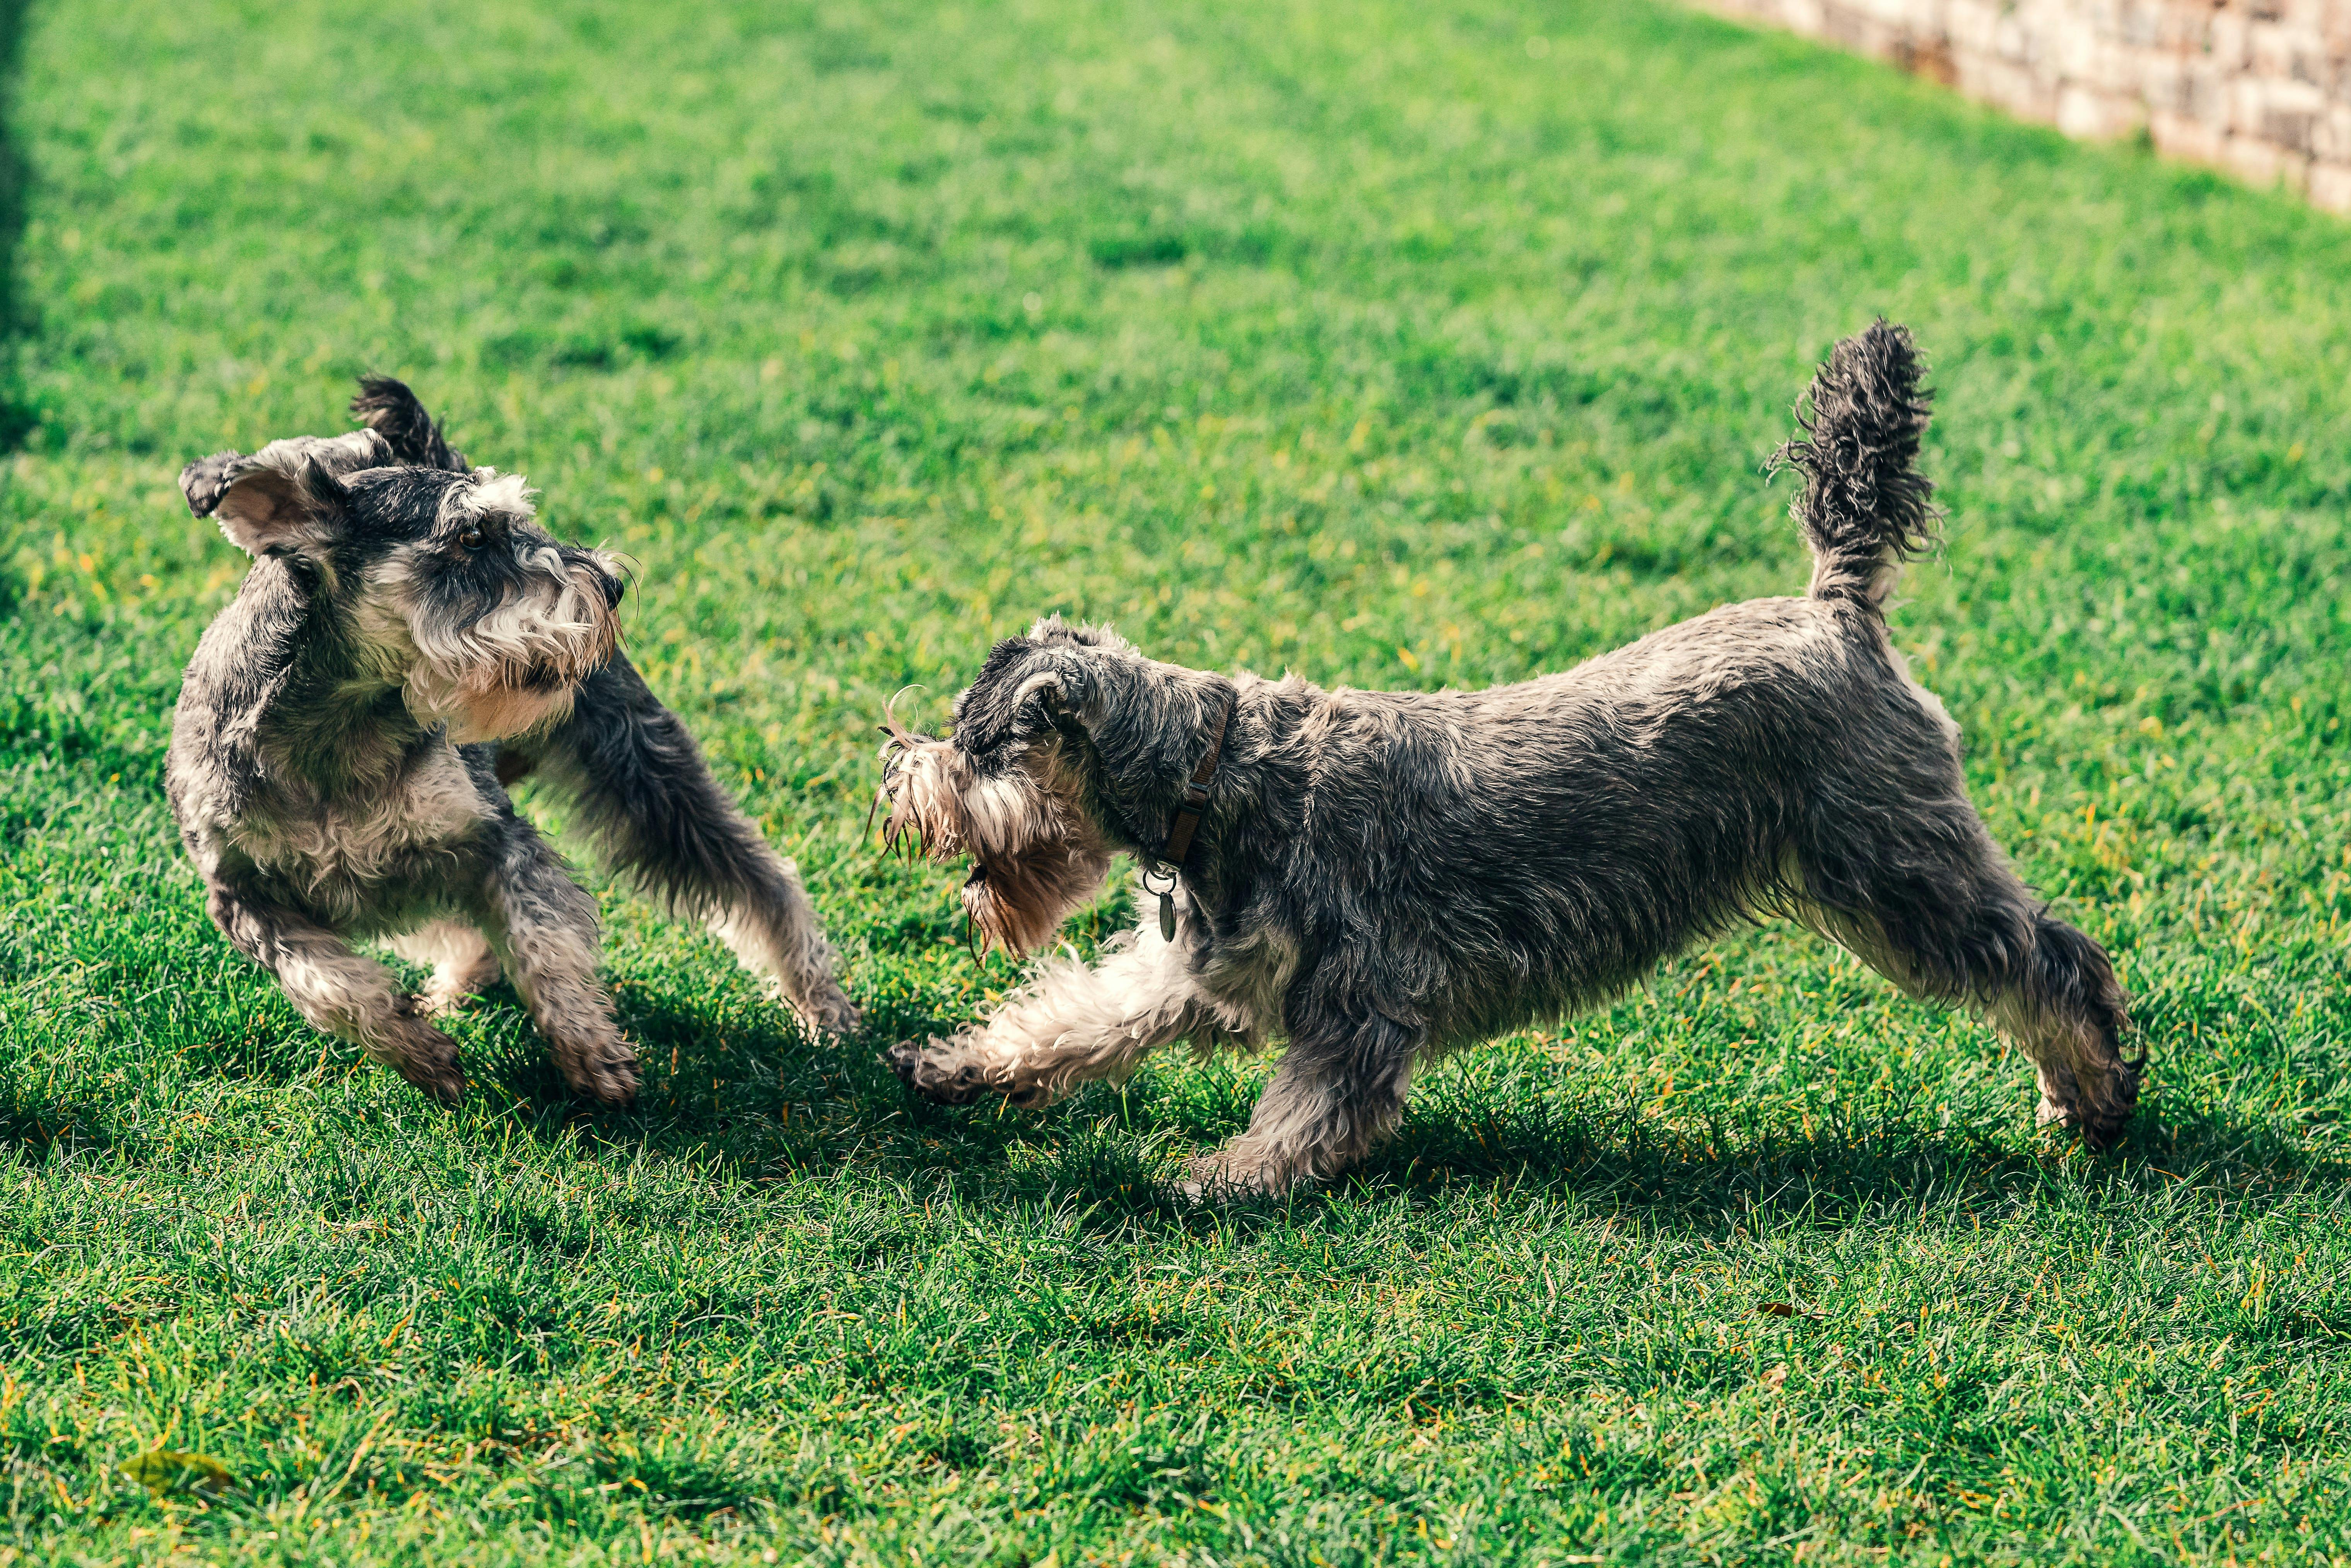 Two schnauzers playing on grass